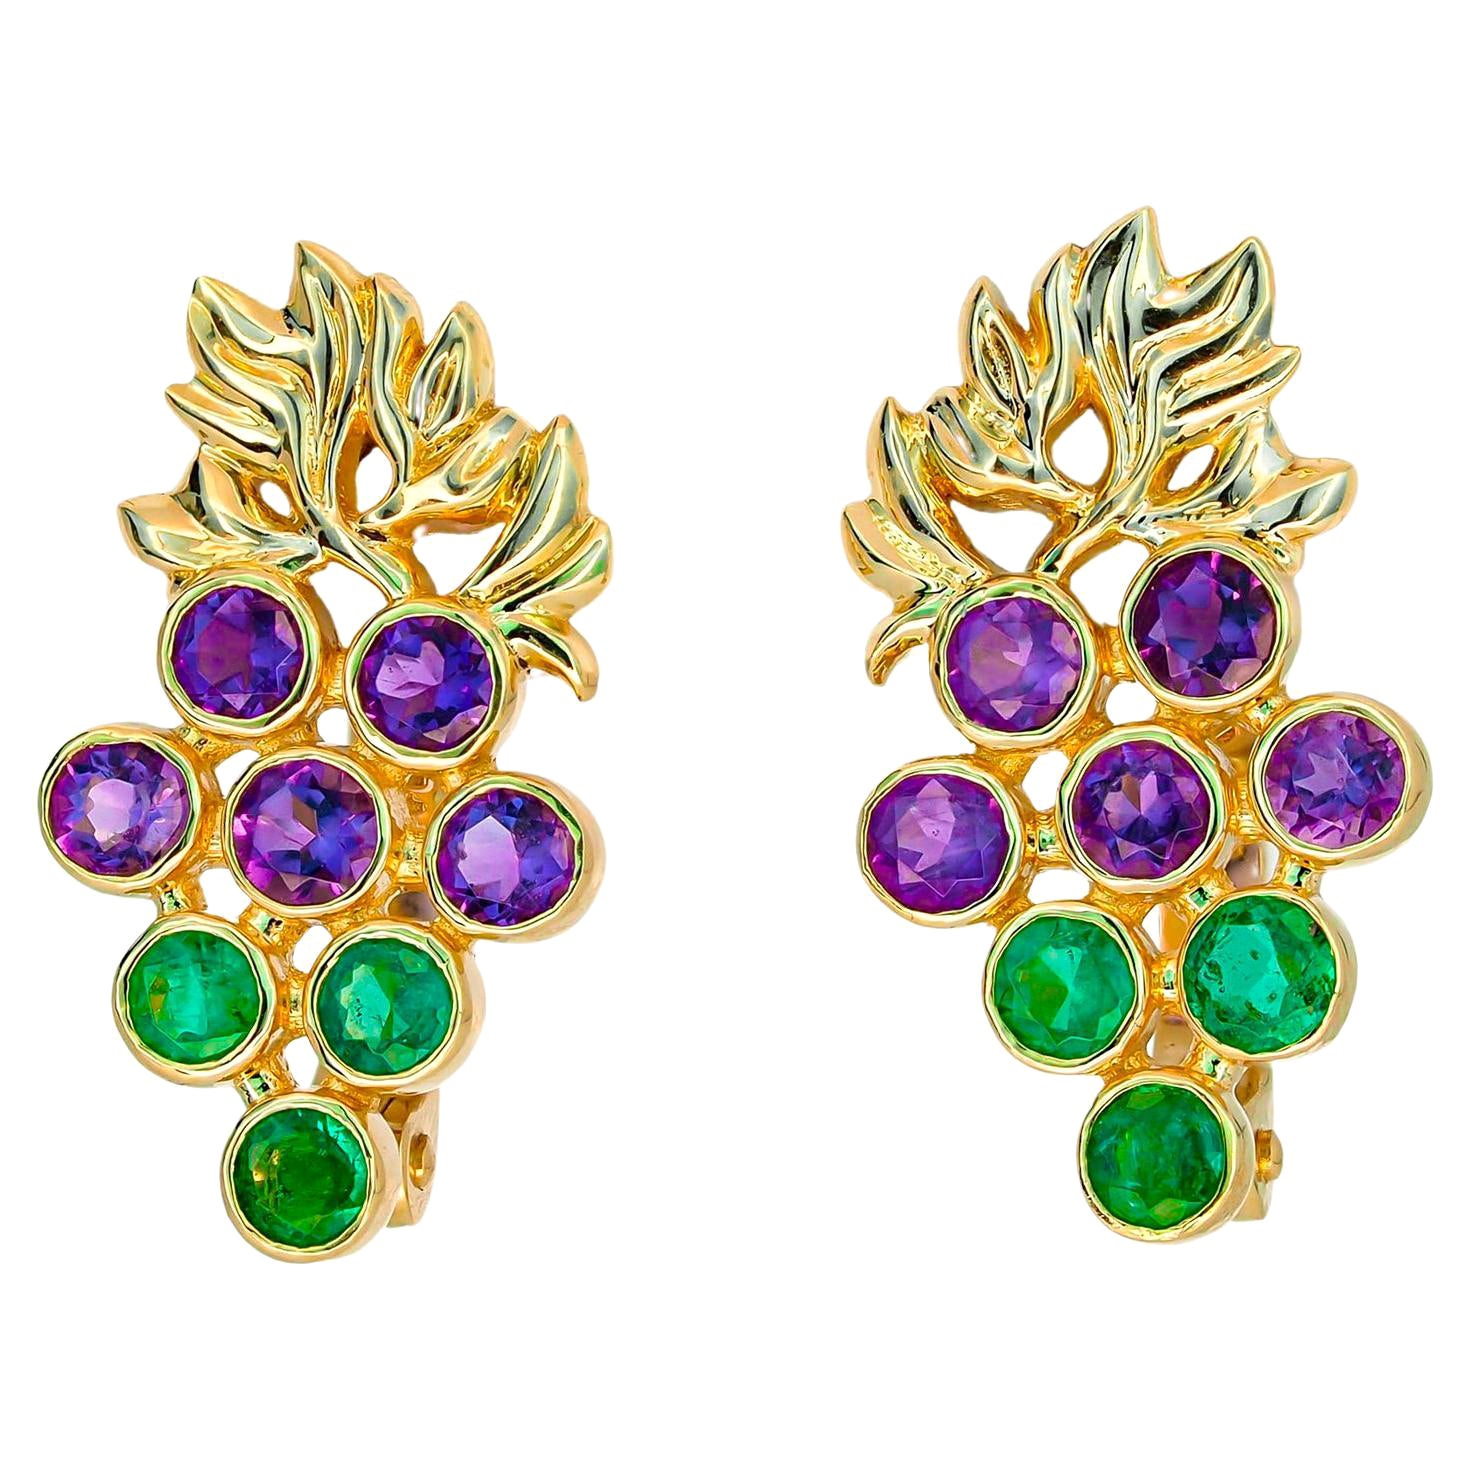 14k Gold Grape Earrings with Emeralds and Amethysts